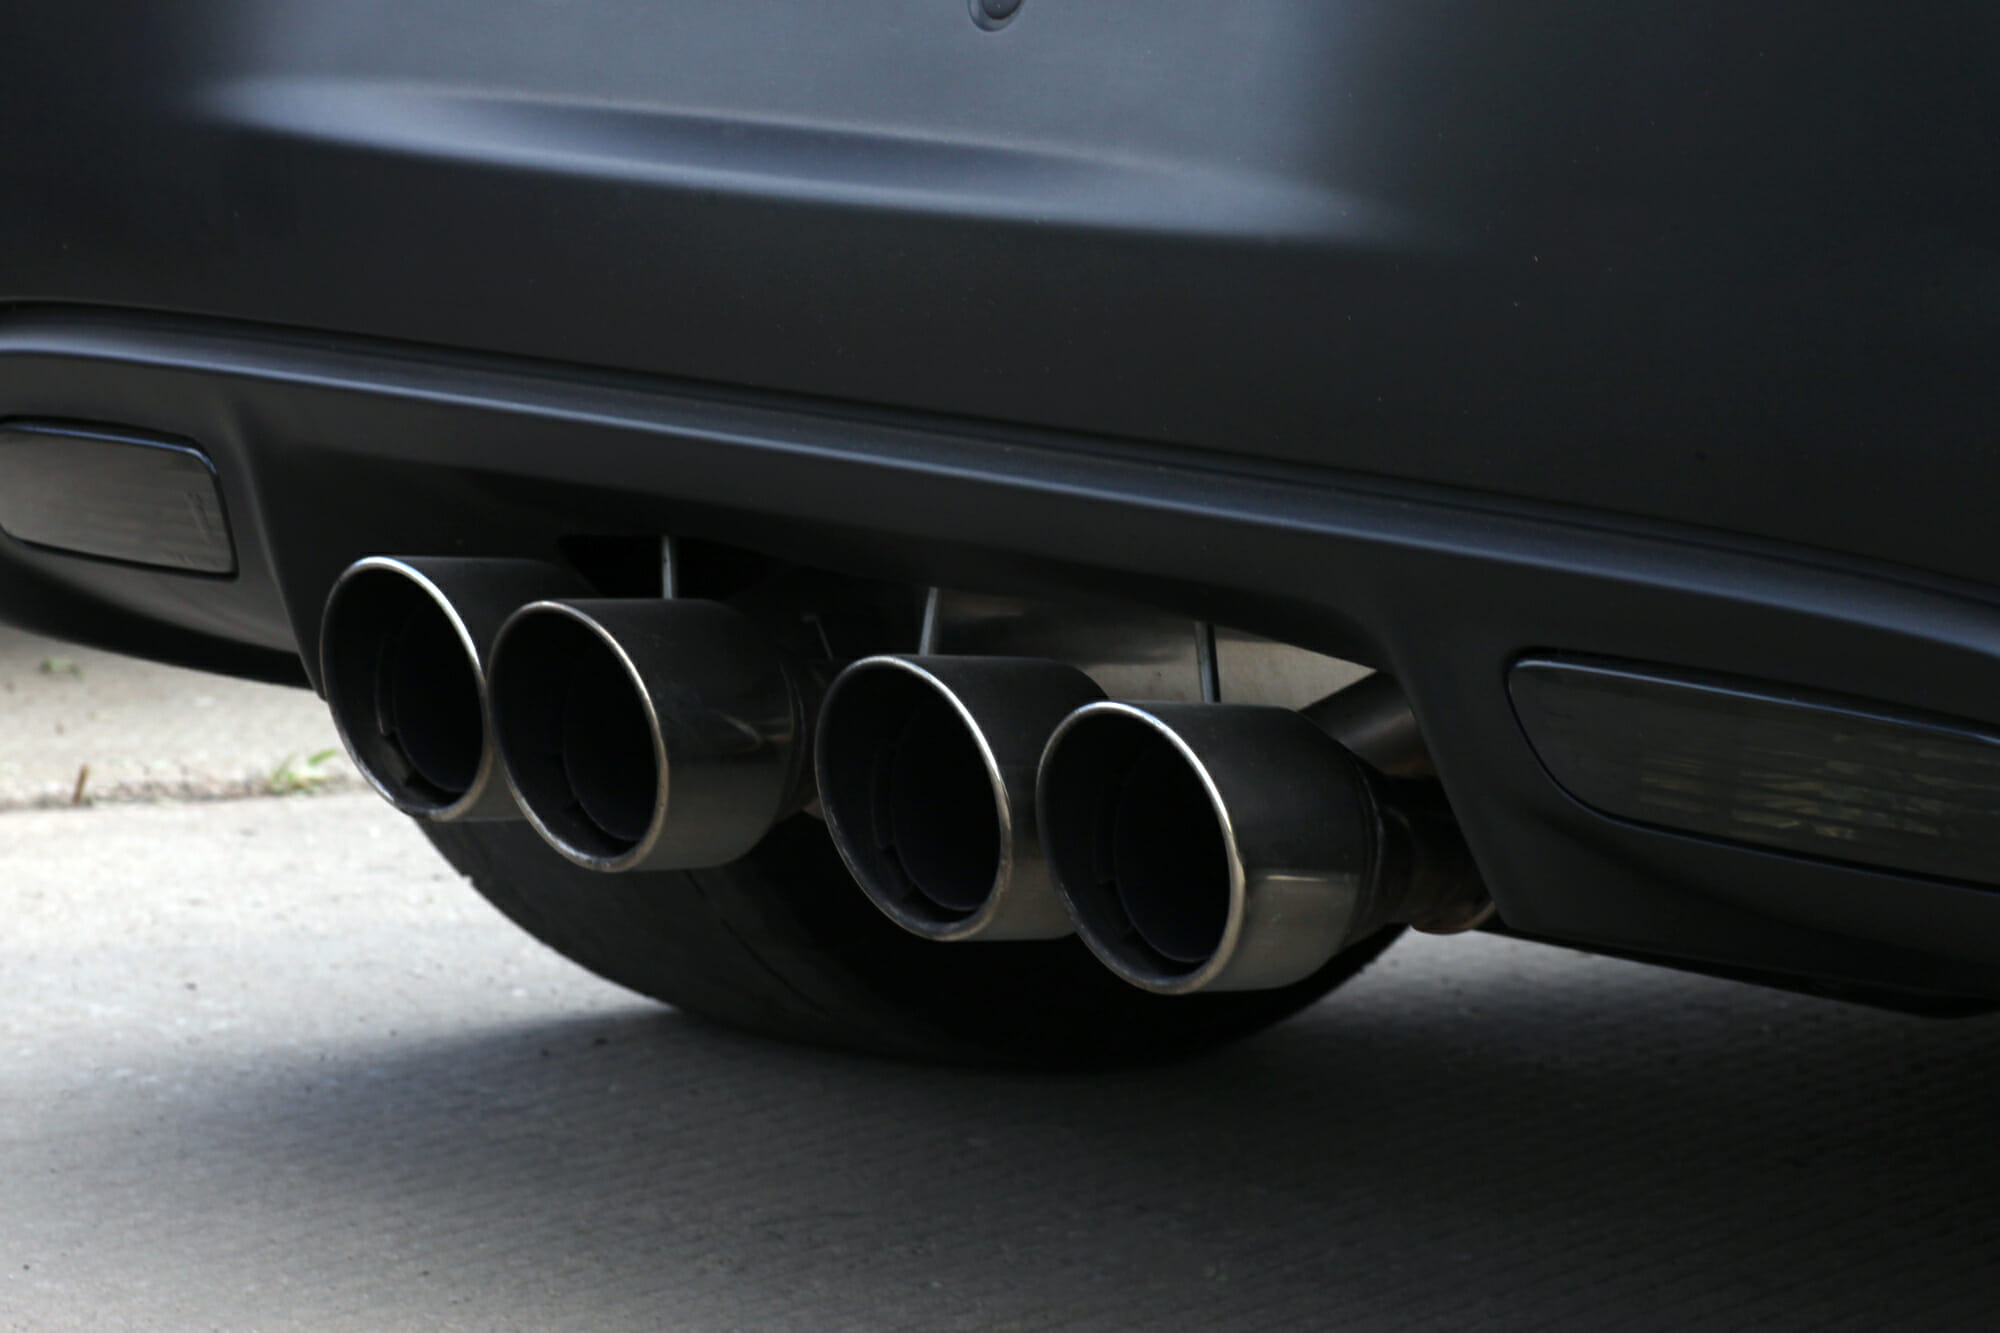 Exhaust Pipes - Photo by Deposit Photos